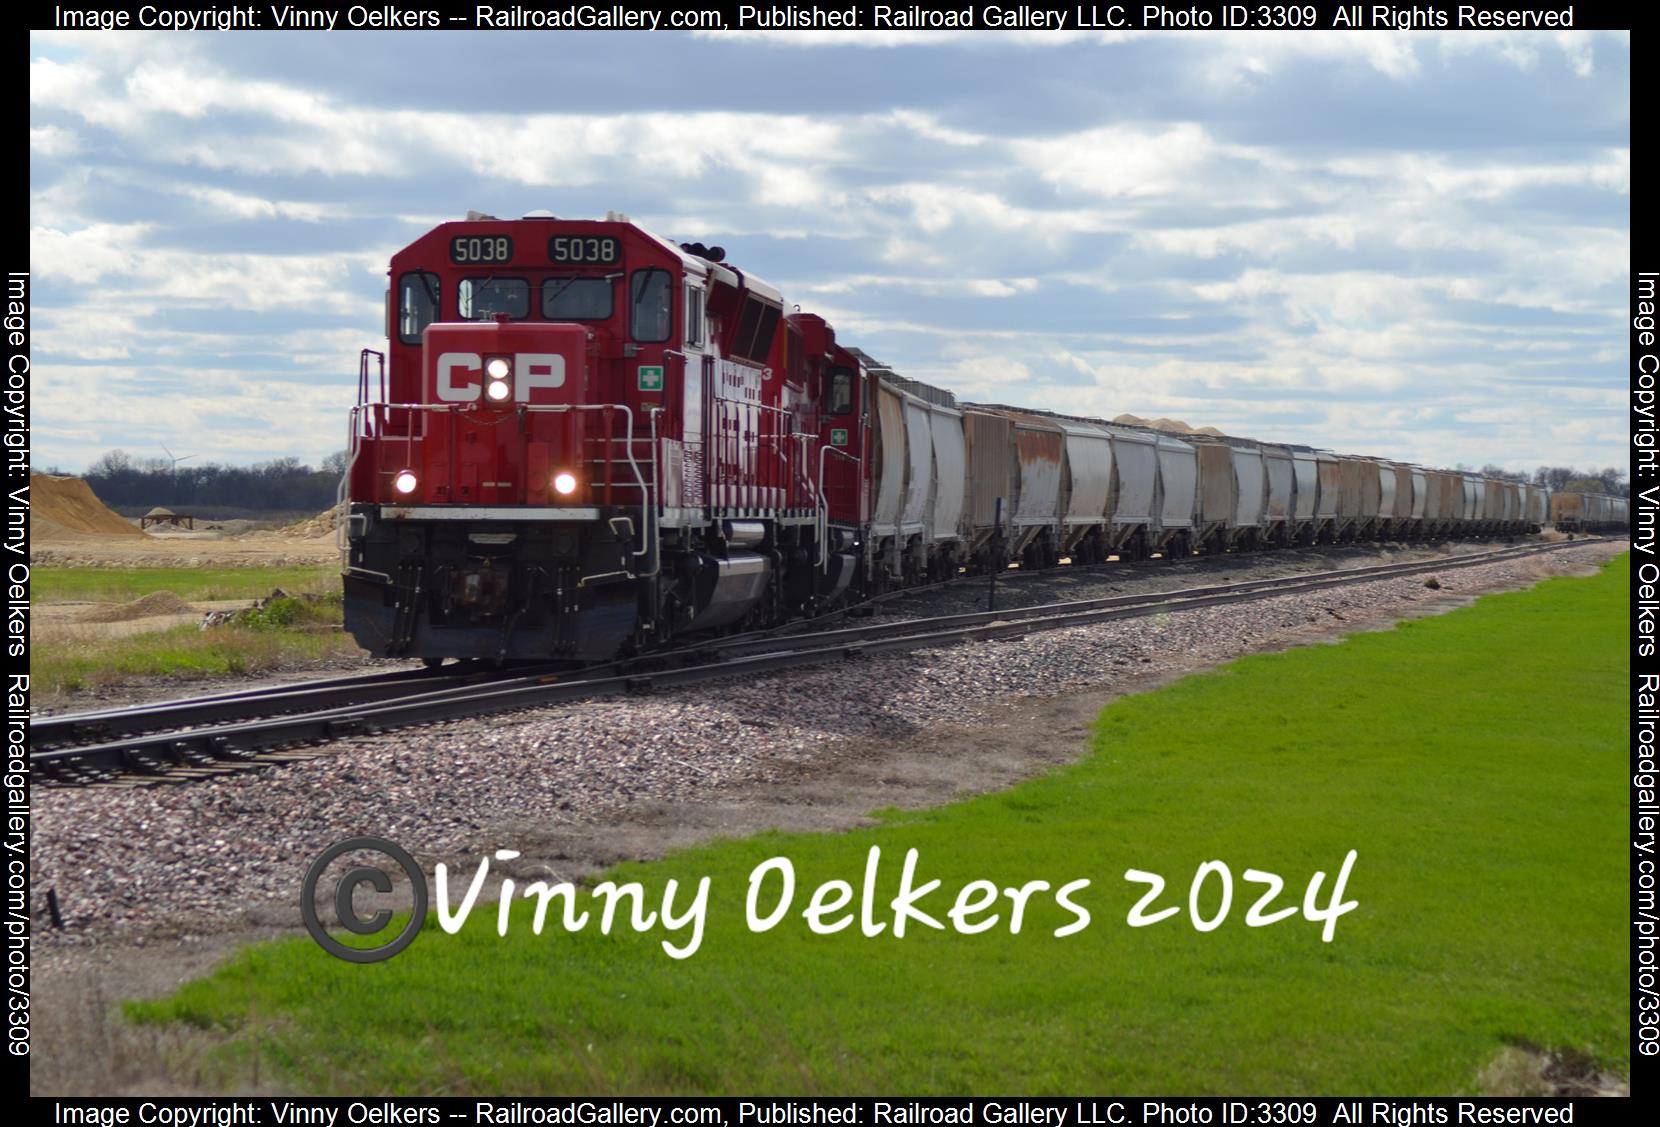 CP 5038 is a class SD30ECO  and  is pictured in Spencer, IA, United States.  This was taken along the Sheldon Subdivision  on the Canadian Pacific Railway. Photo Copyright: Vinny Oelkers uploaded to Railroad Gallery on 04/20/2024. This photograph of CP 5038 was taken on Friday, April 19, 2024. All Rights Reserved. 